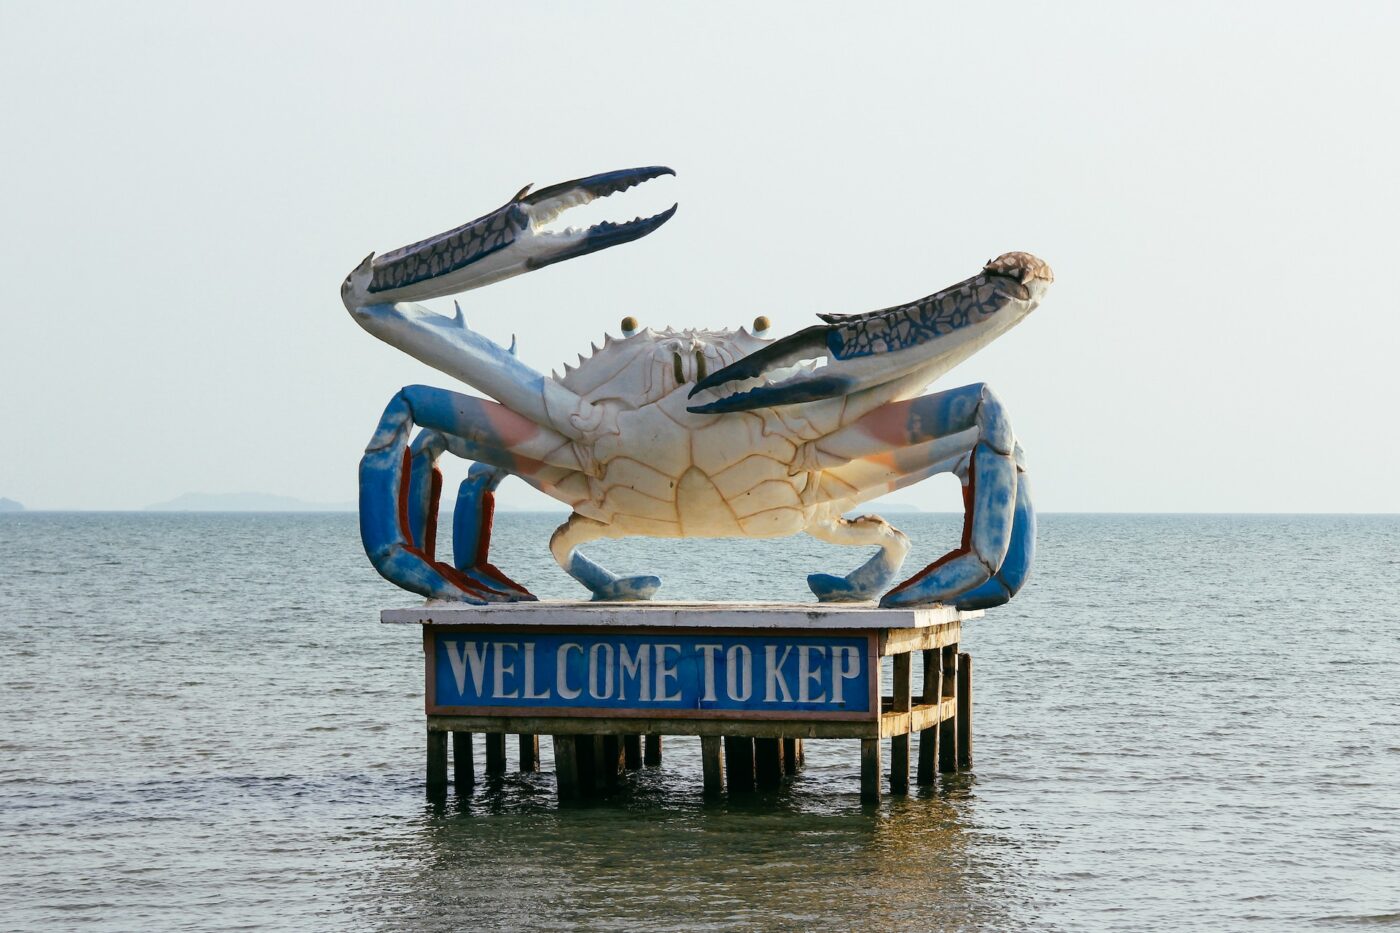 Giant crab statue in Kep, Cambodia